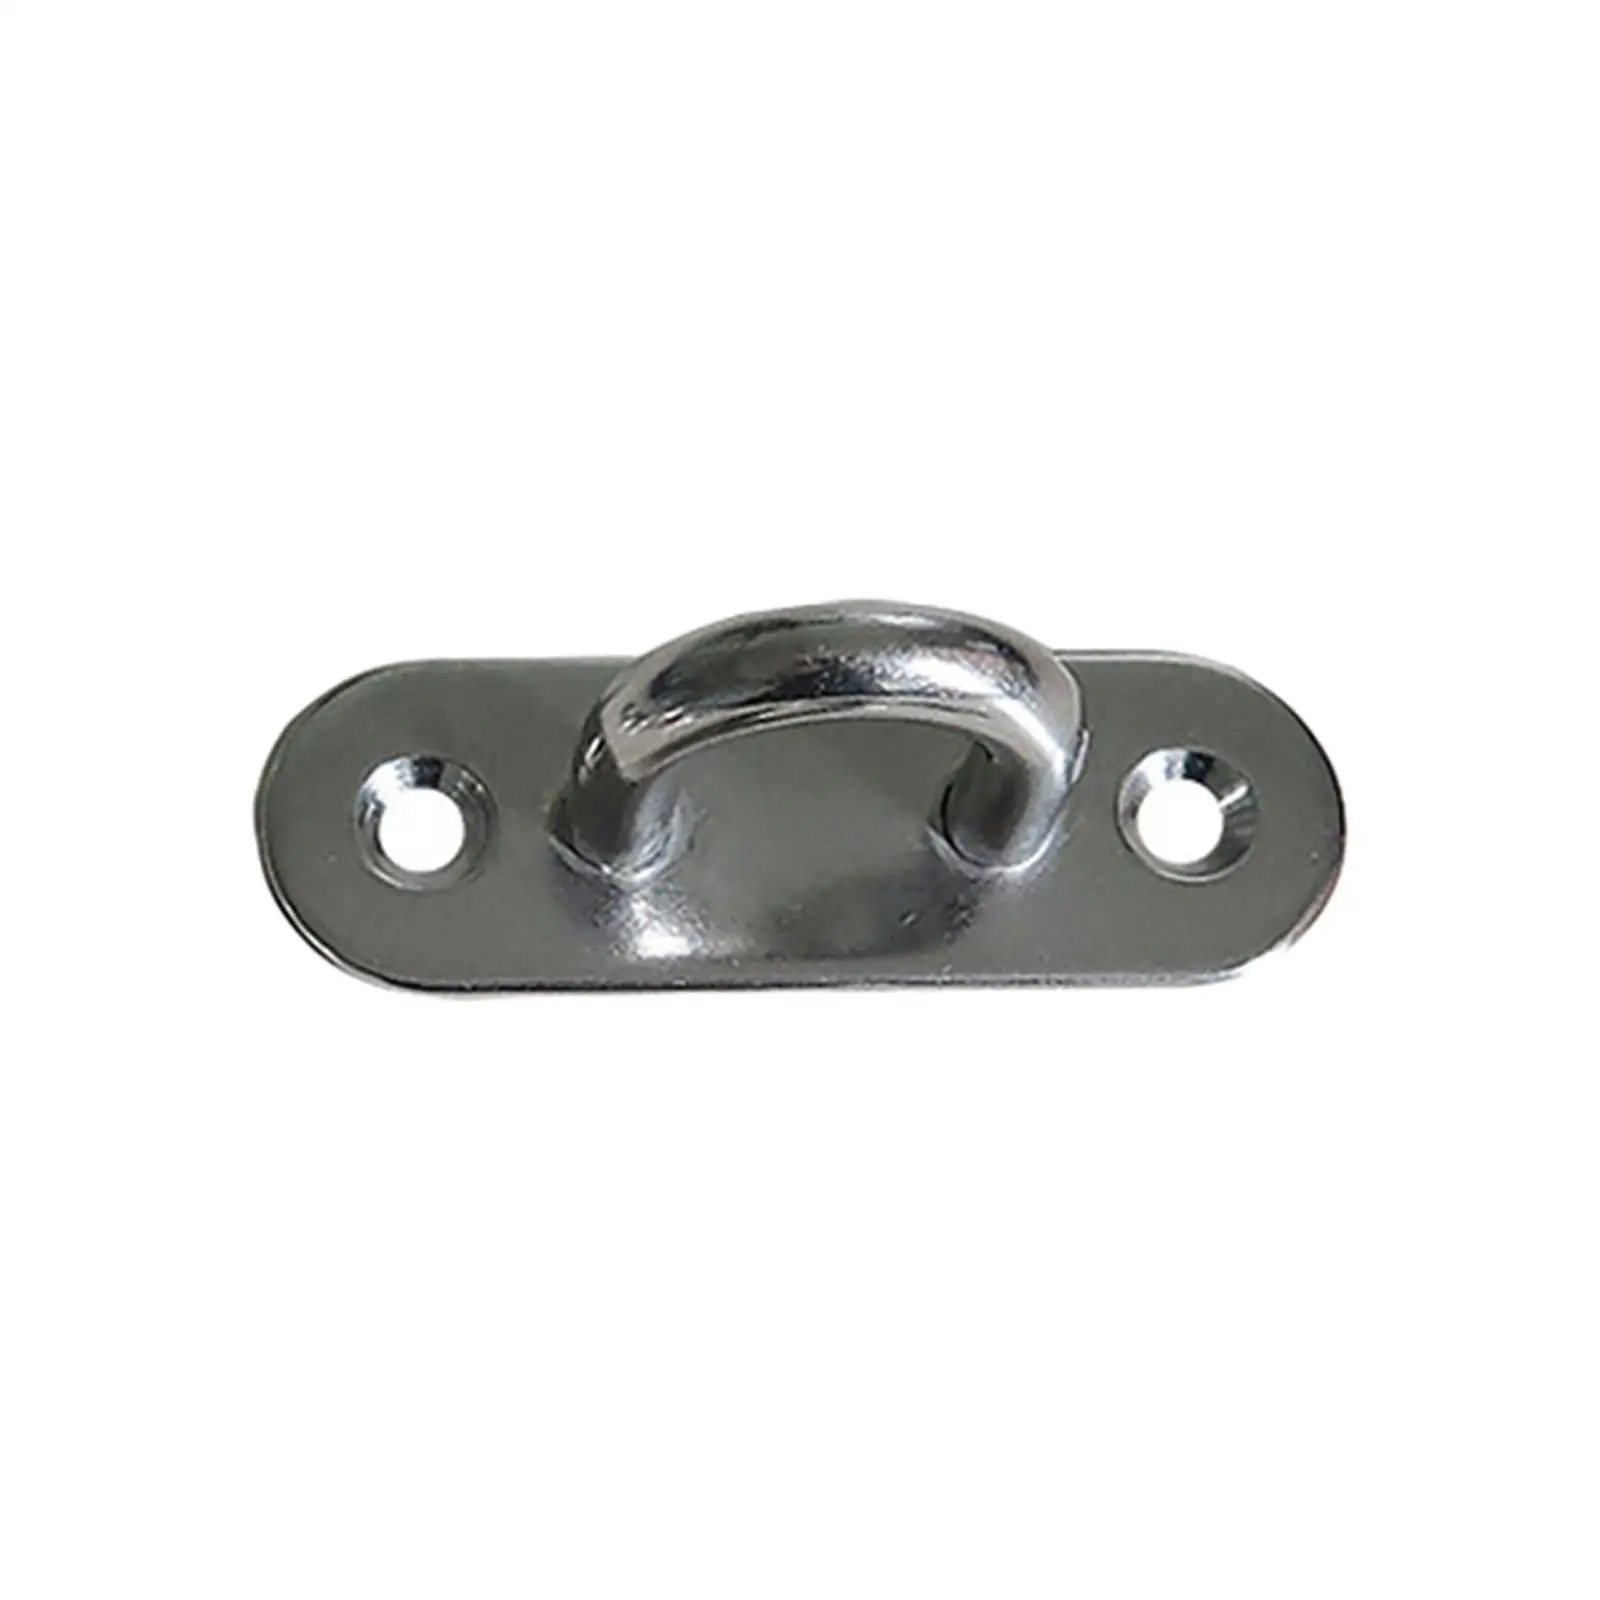 Horse Tie Ring Outdoor Sports Prevent Horses from Pulling Back Fasteners with Eye Bolt Horse Tack Supplies Safety Accessories